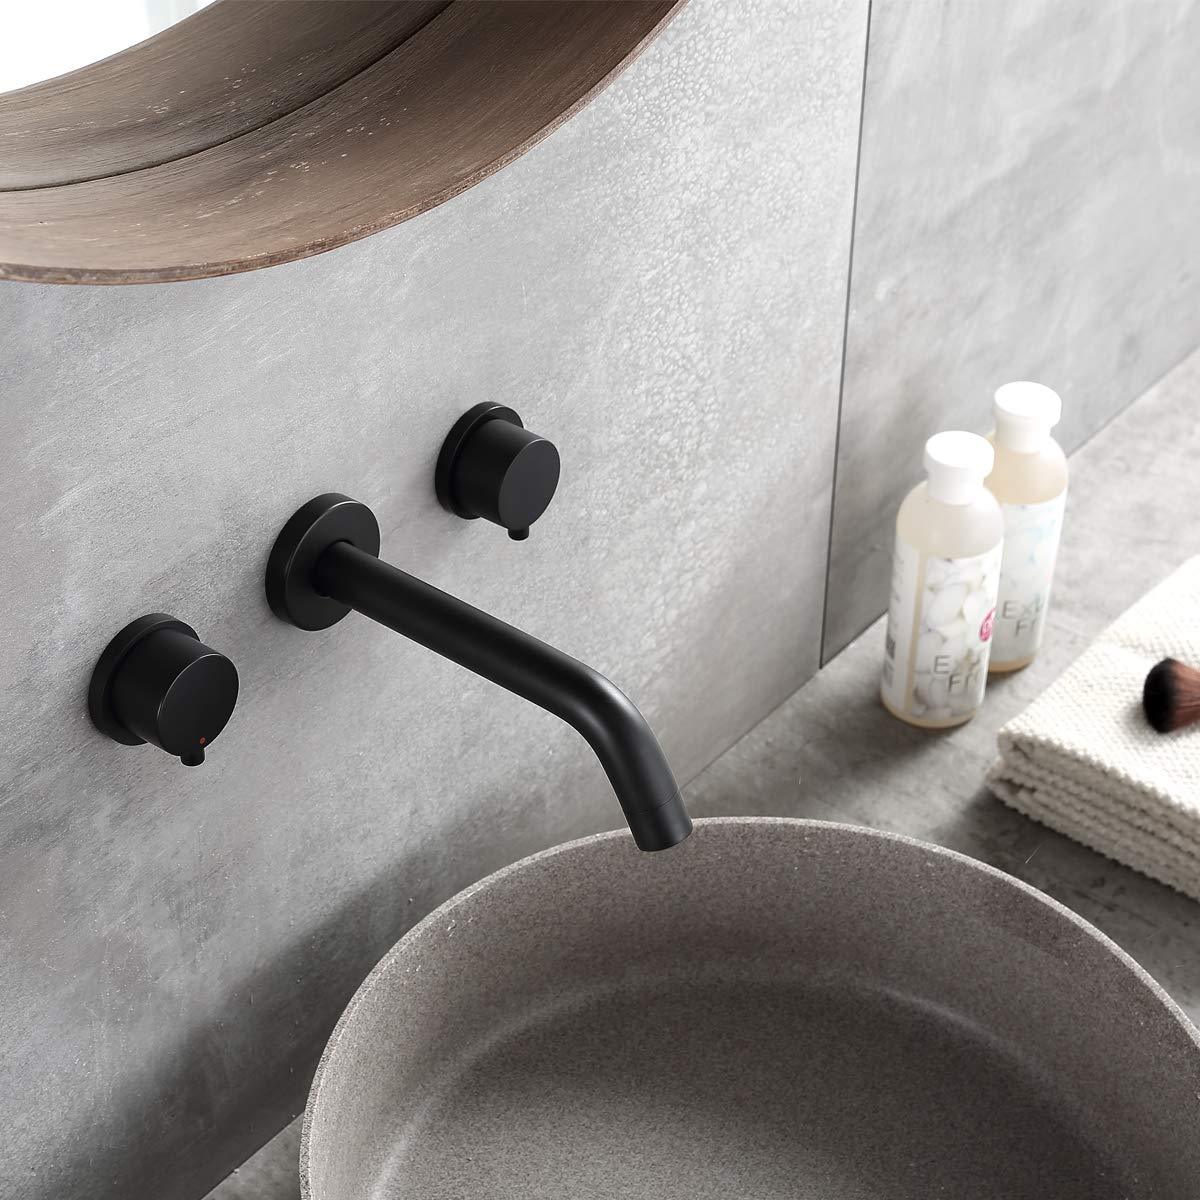 2-Handle Wall Mount Bathroom Faucet Basin Mixer Taps with Rough-in Valve in Black - Alipuinc